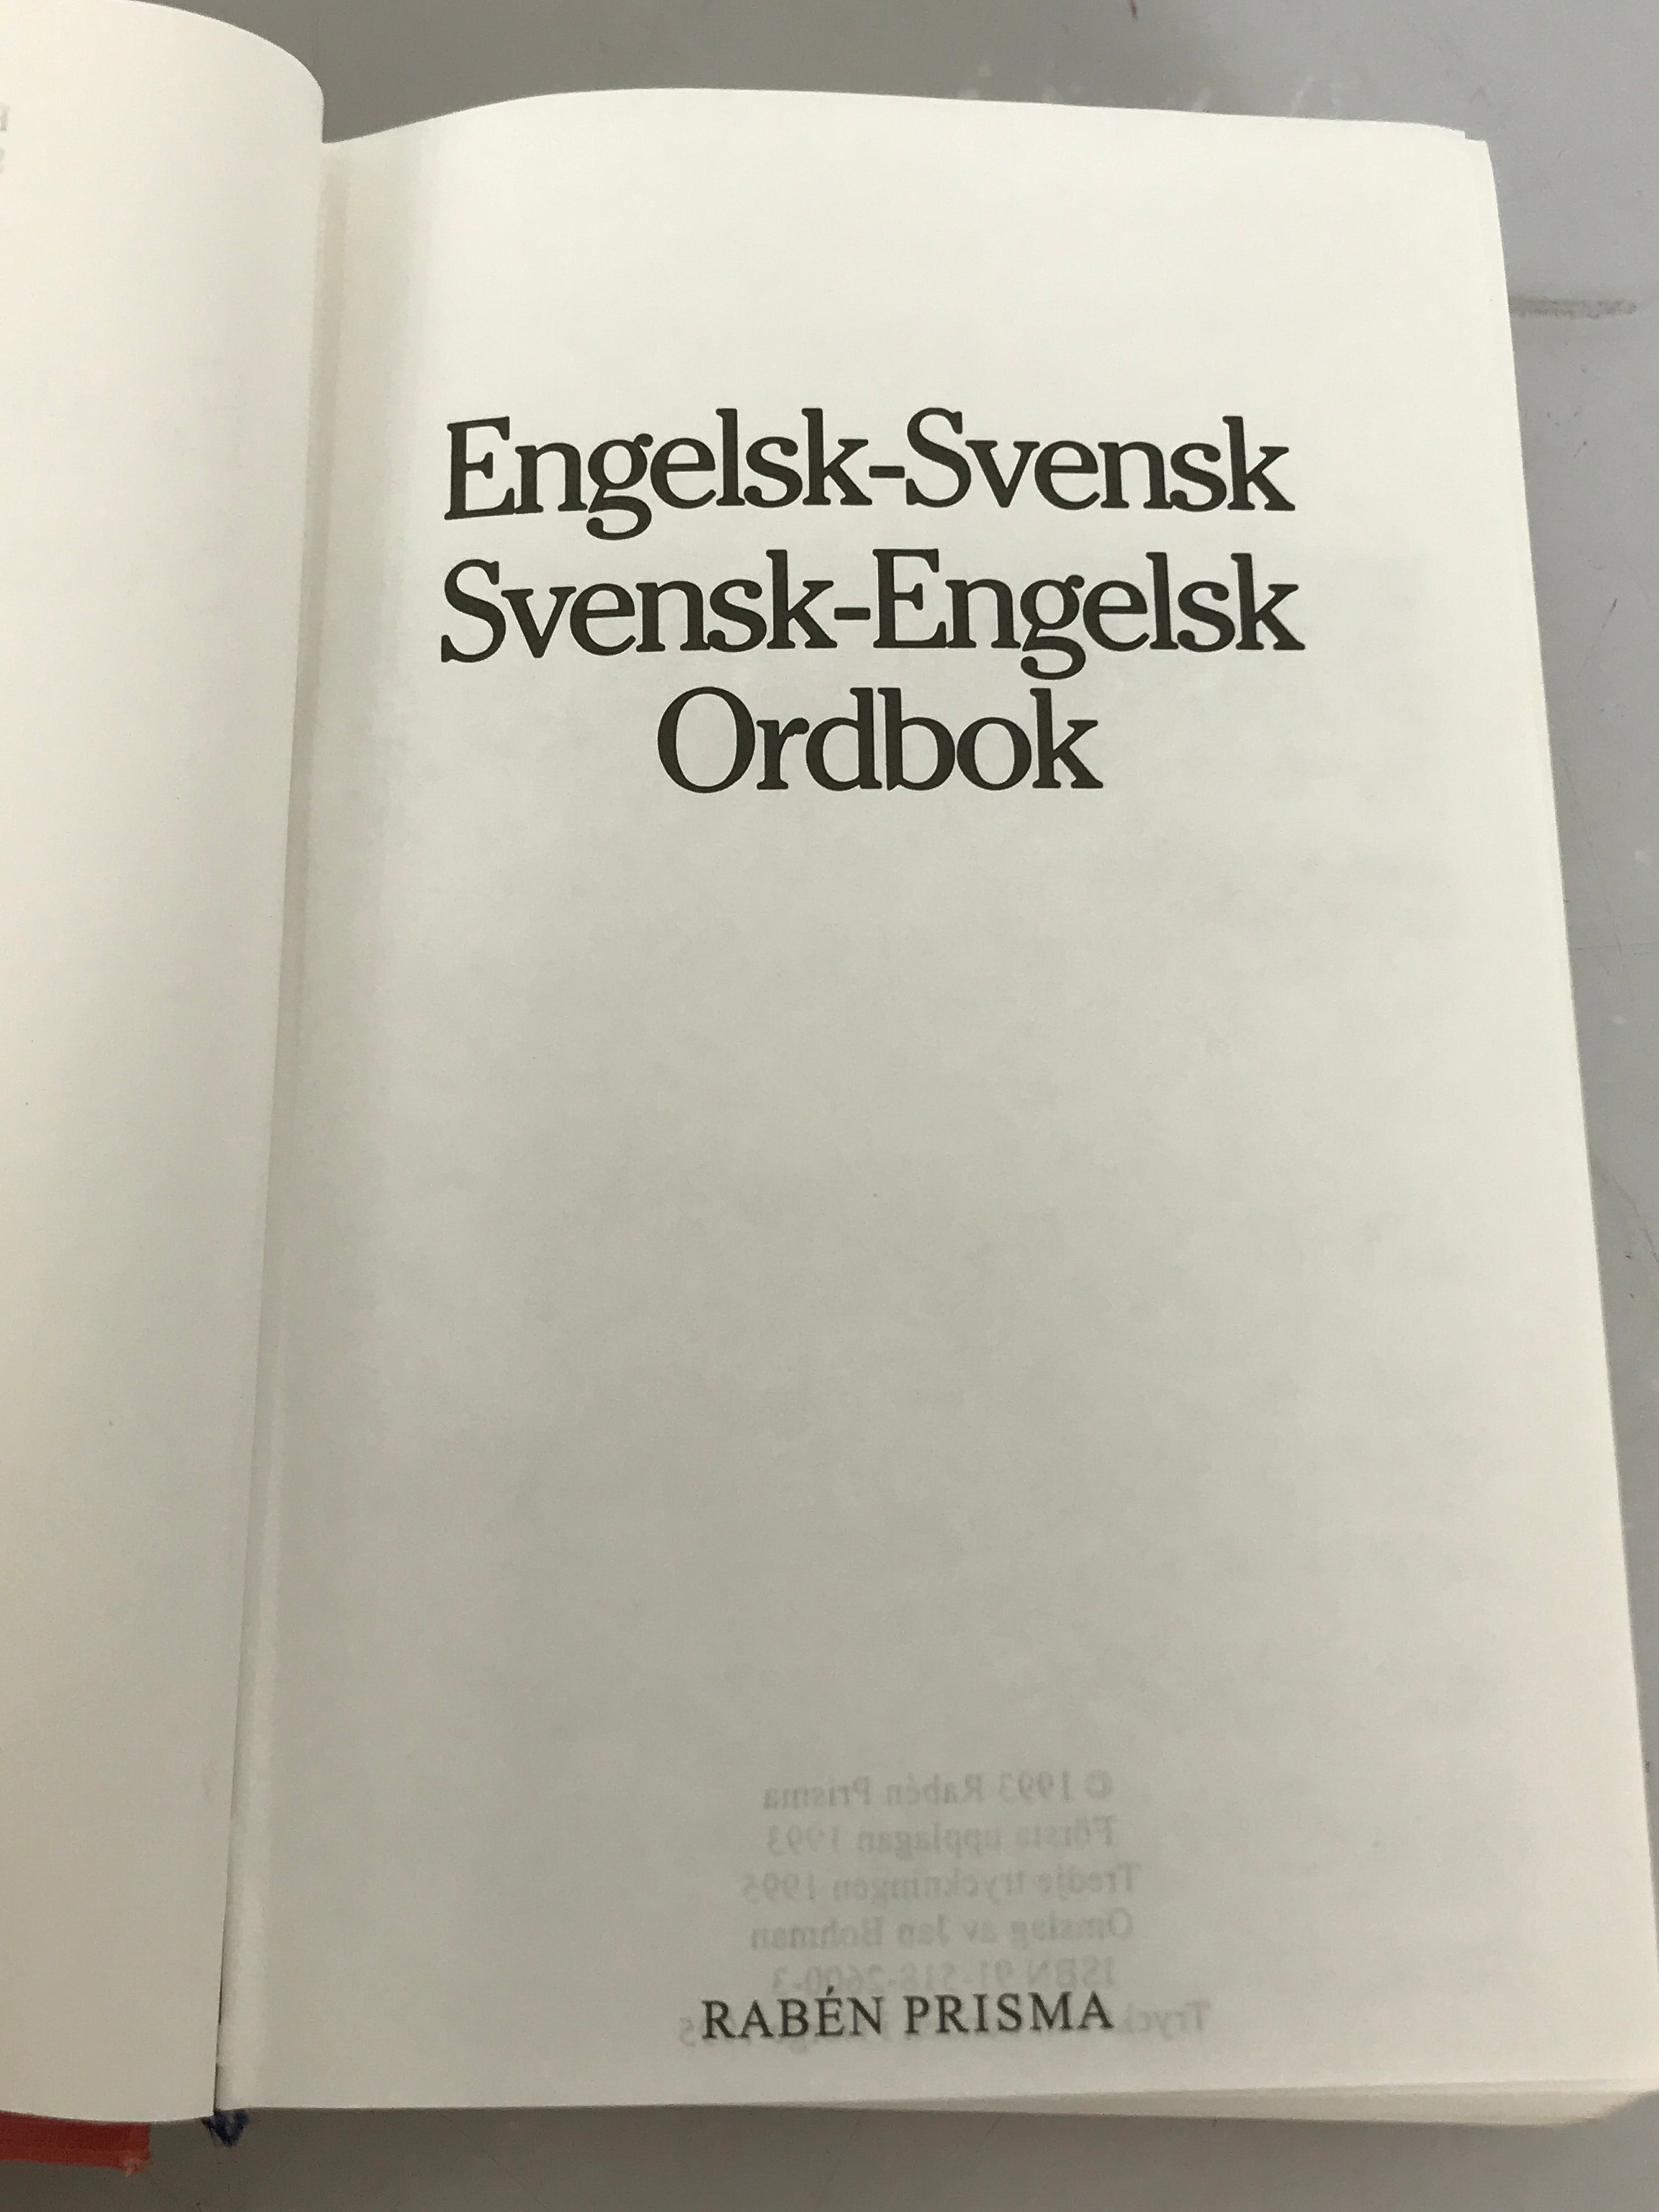 Lot of 2: A Swedish-English Dictionary 1995 / The Music Dictionary 1975 HC